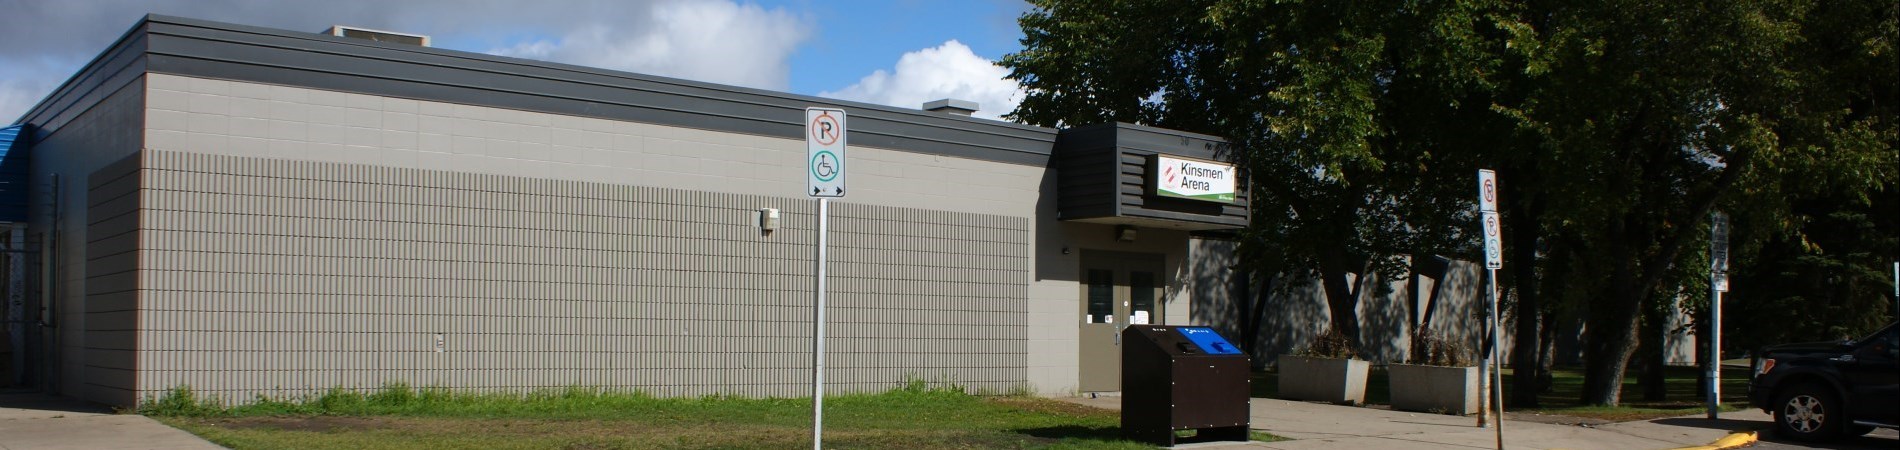 Front view of Kinsmen Arena